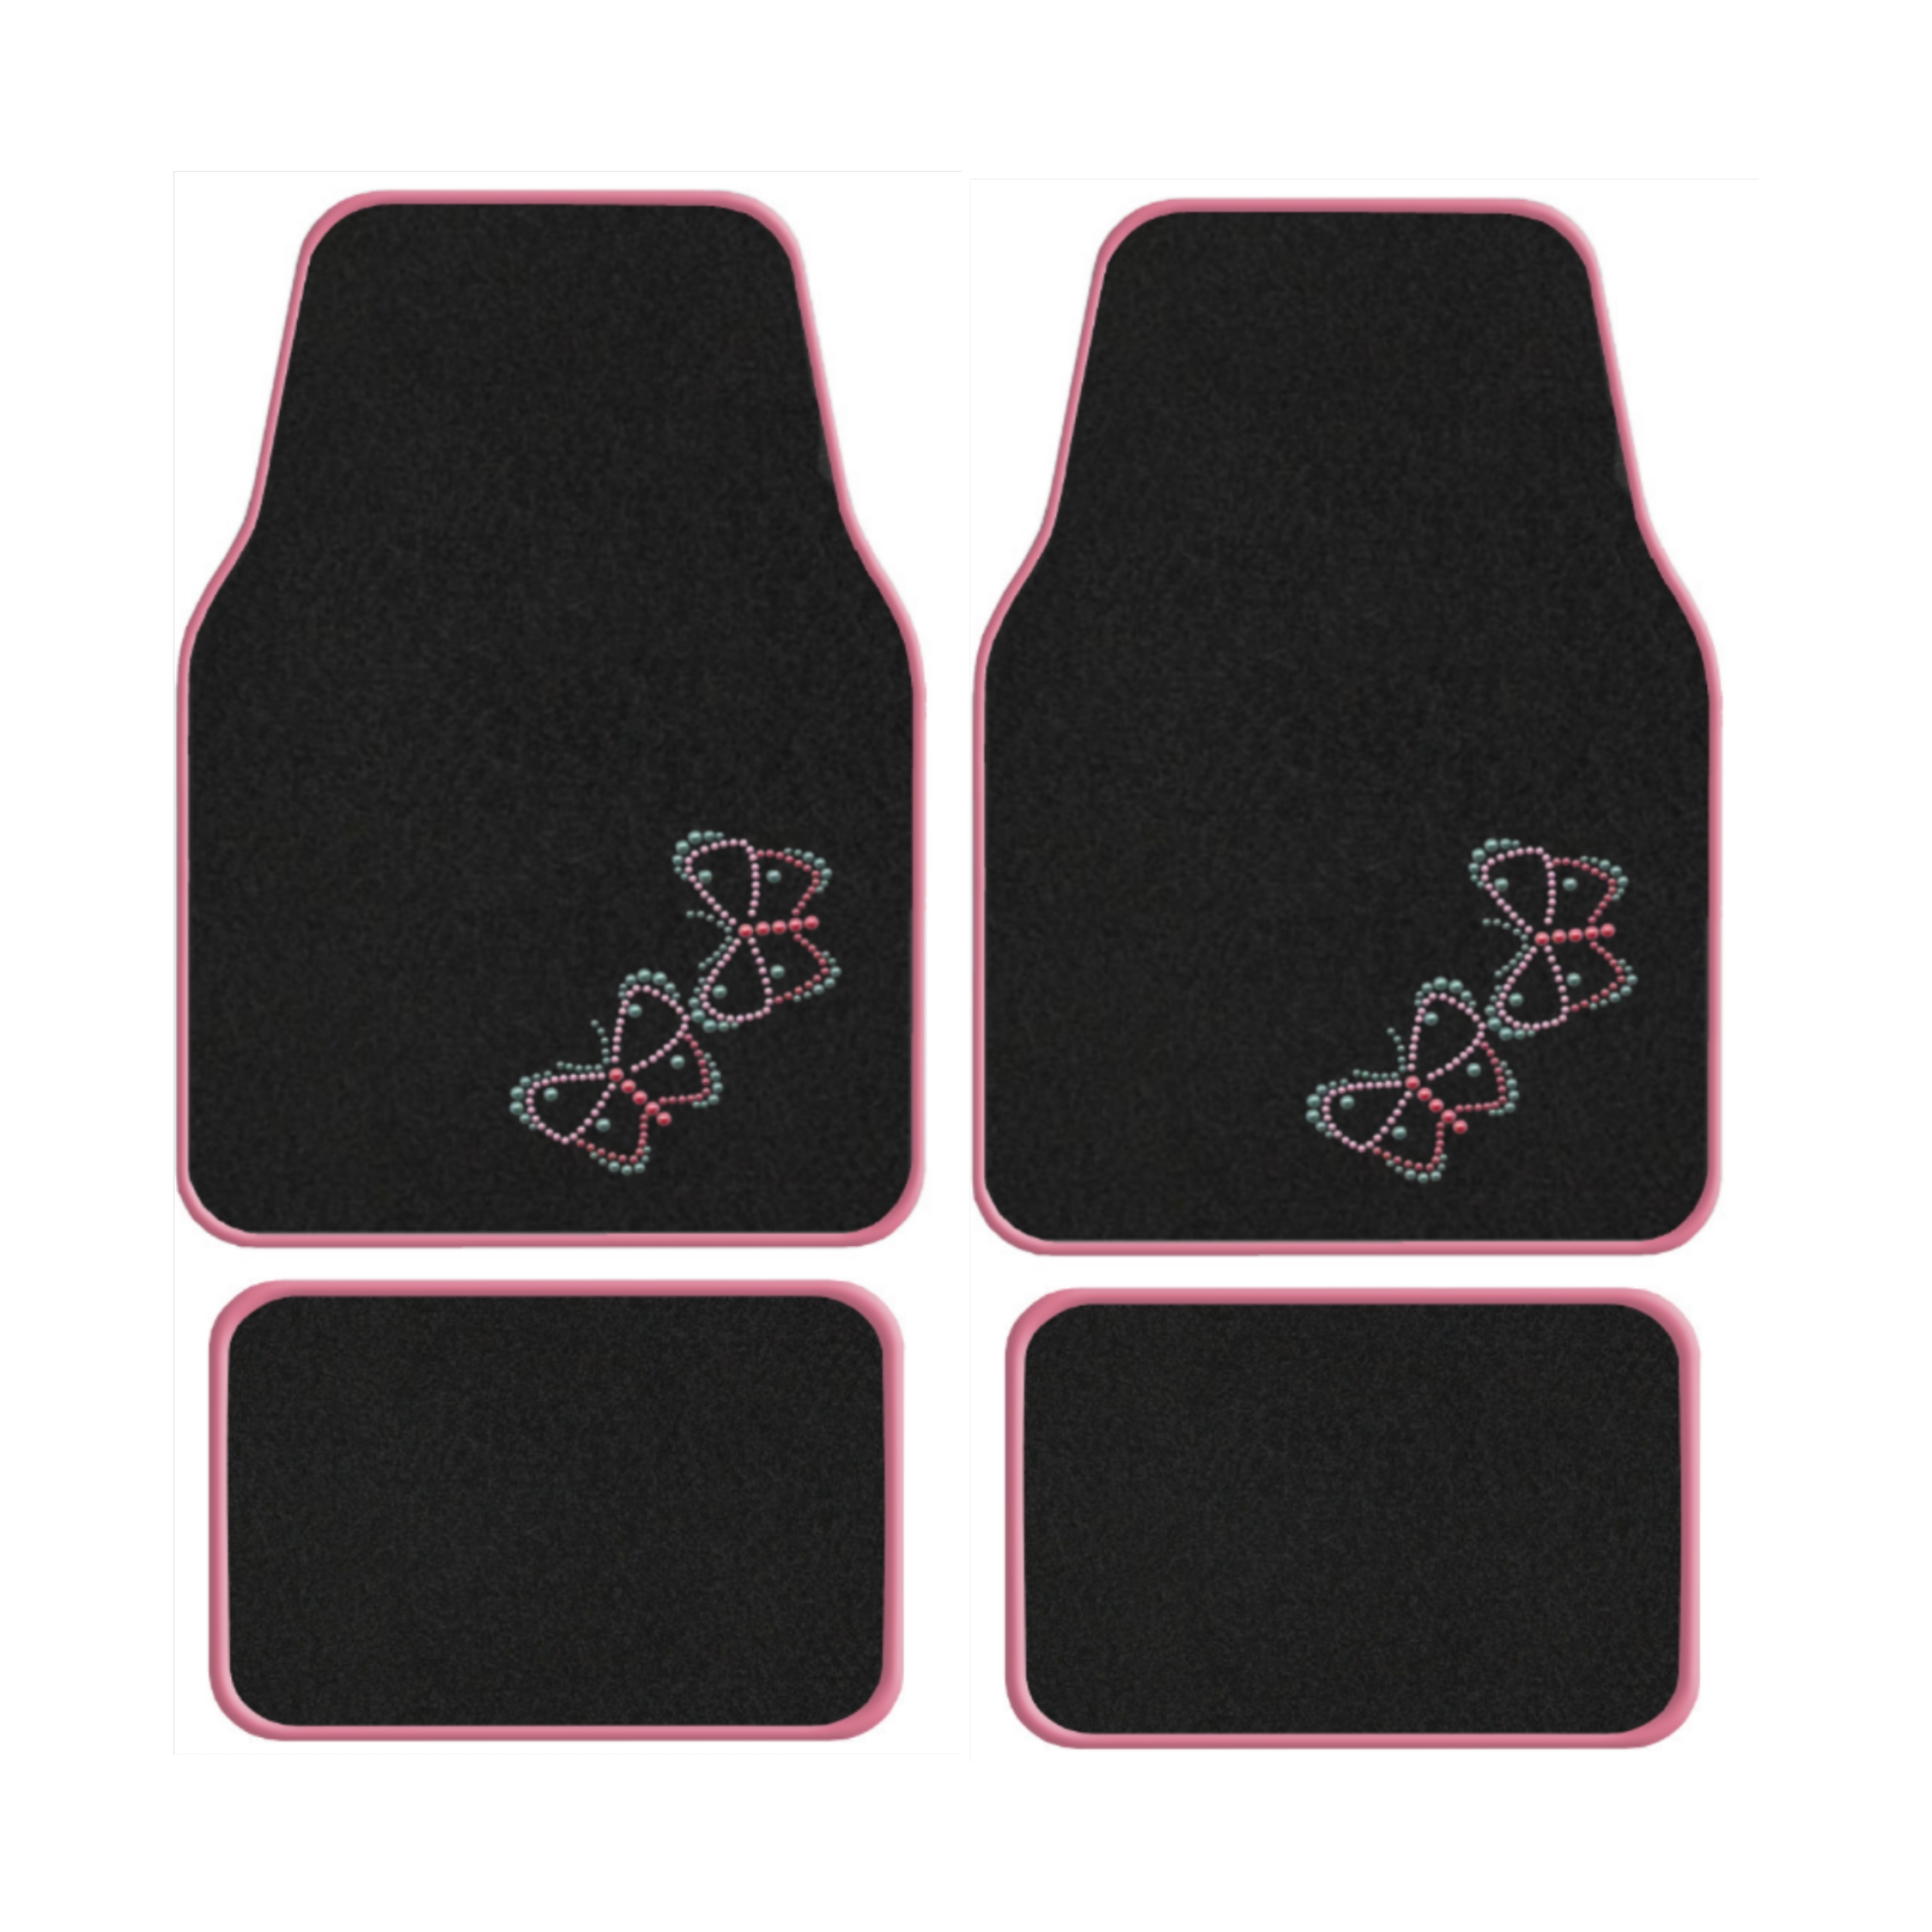 Girly Mats Universal Fit Butterfly Carpet Floor Mats Set of 4 (Black and Pink) Featured Image